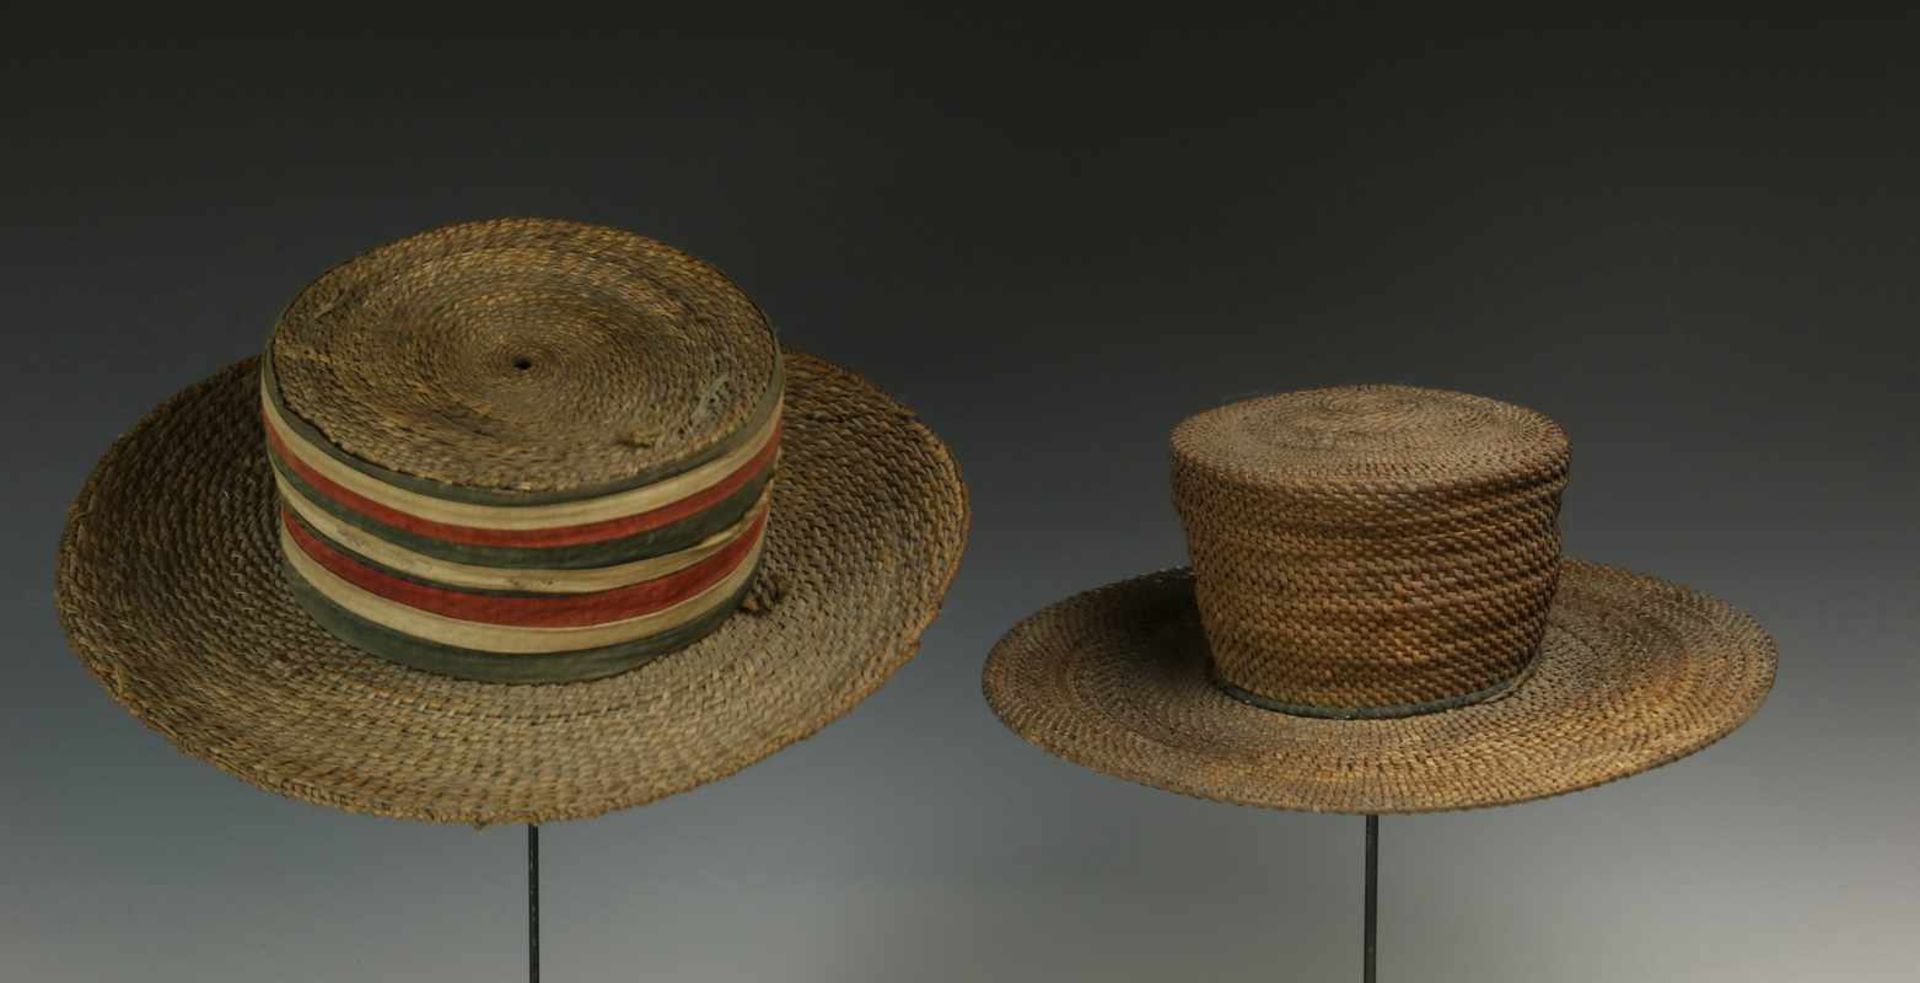 DRC., two braided plantfiber hatsone with colored cotton bands and both with a wooden support